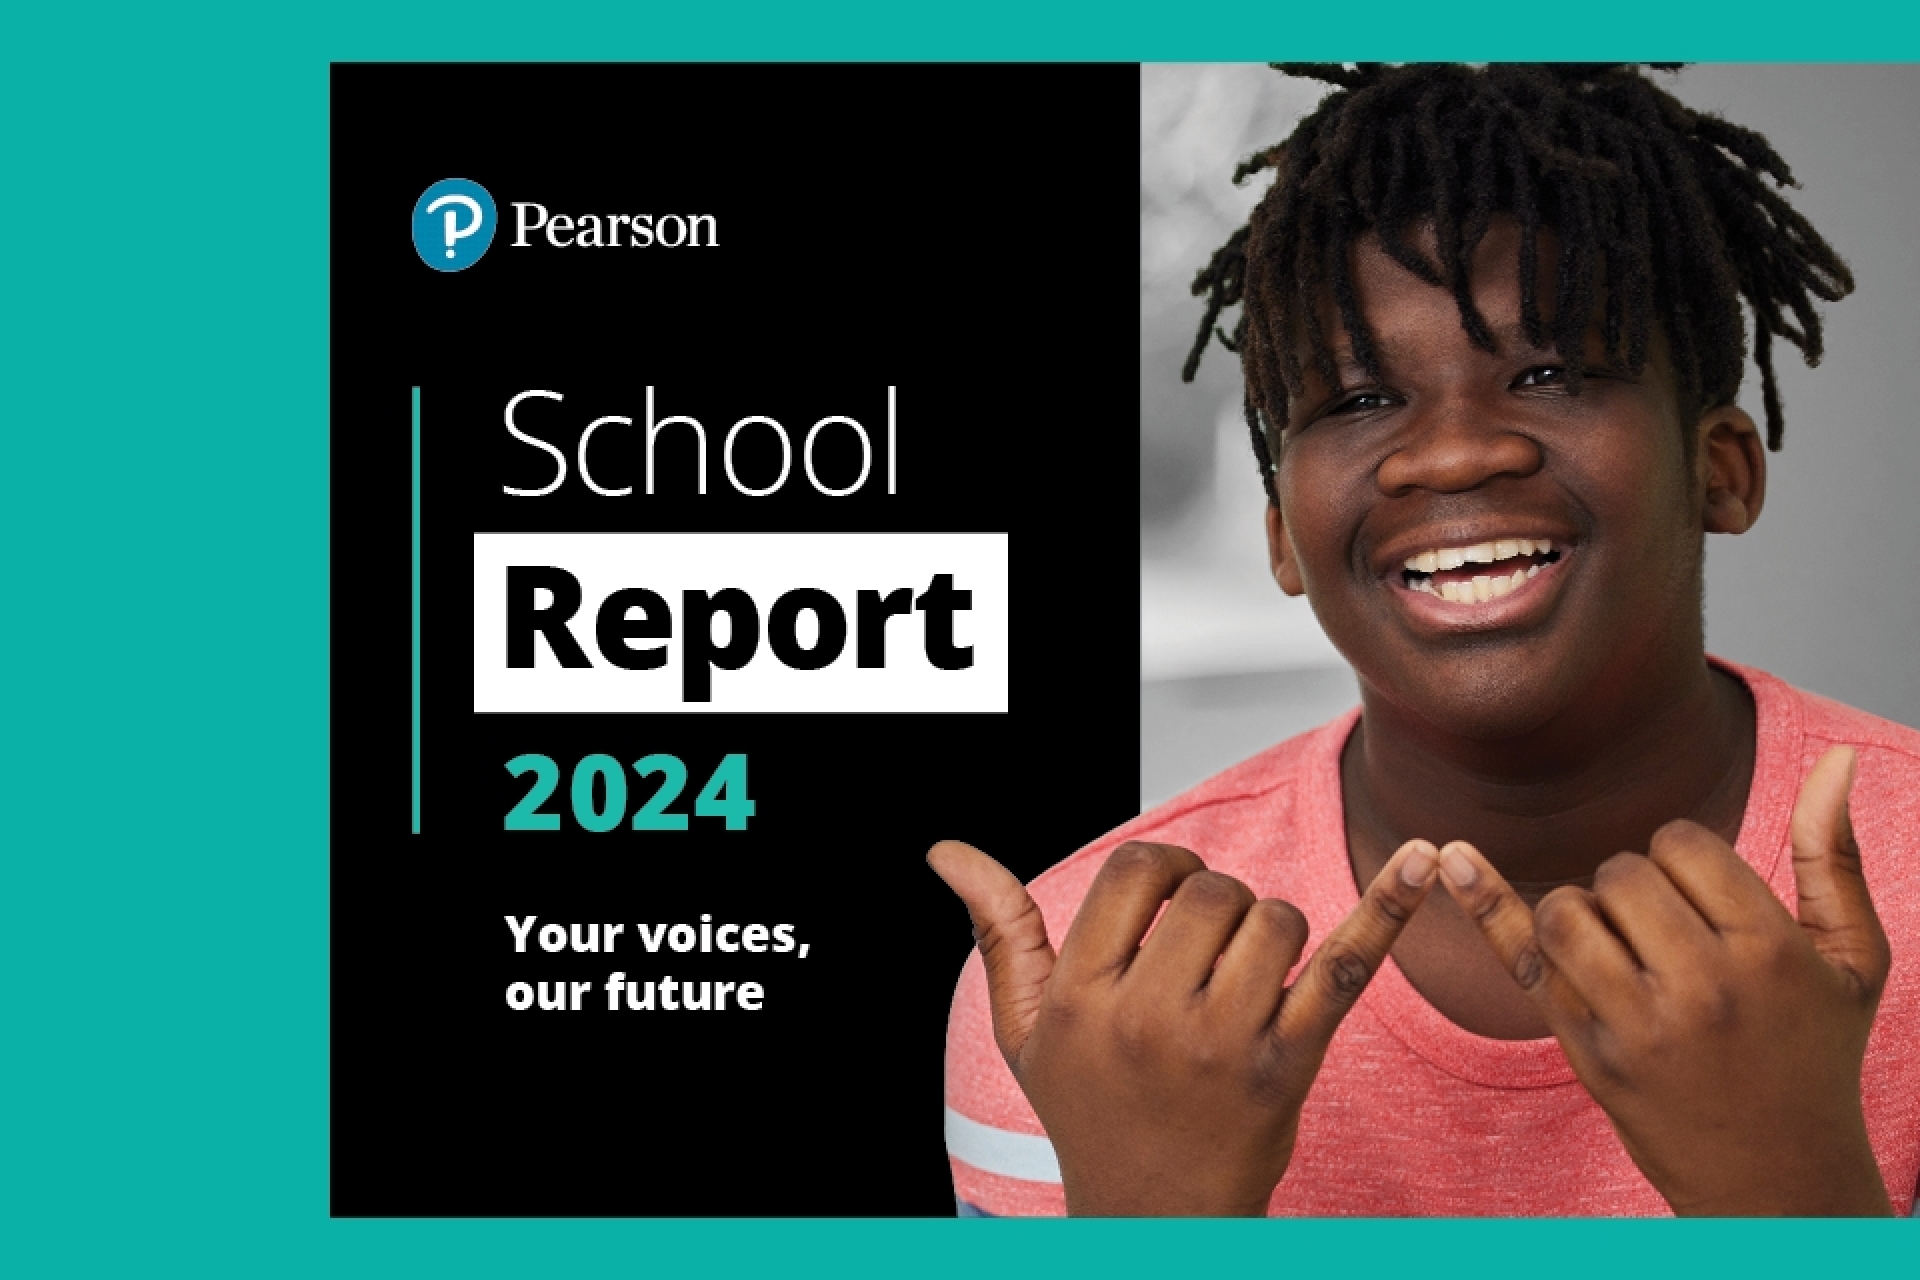 The Pearson School Report 2024 - Hear 12,000 voices on education